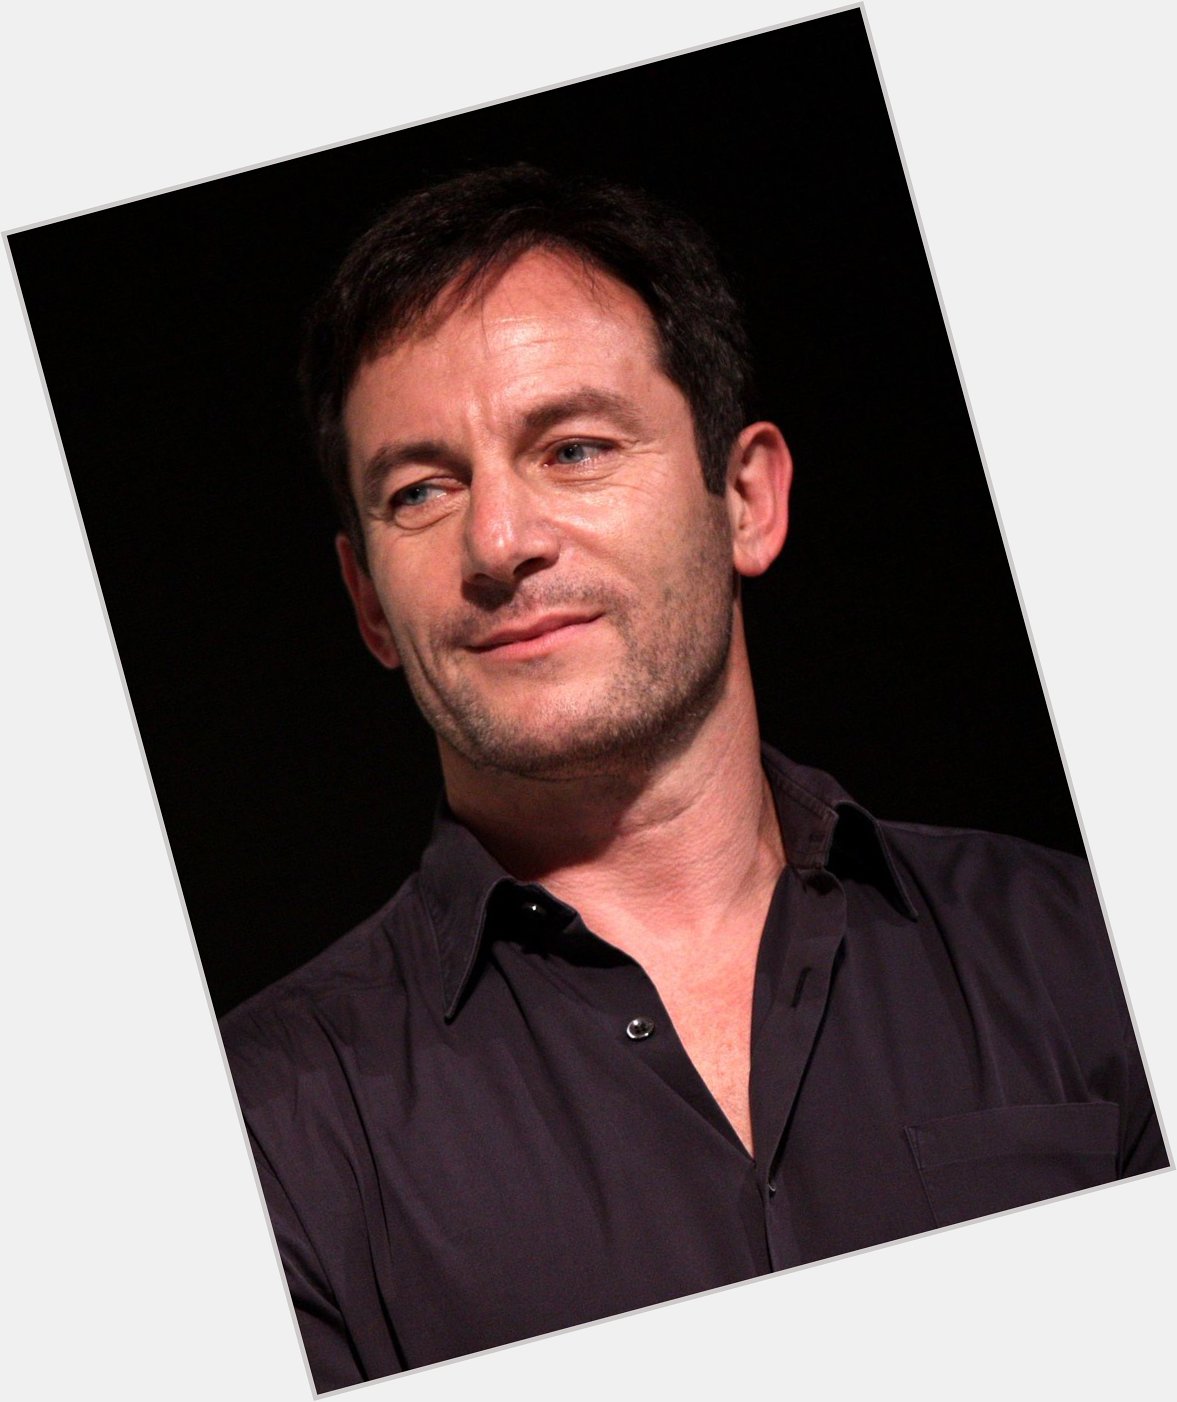  Happy birthday to Jason Isaacs who portrayed Lucius Malfoy in the films! 